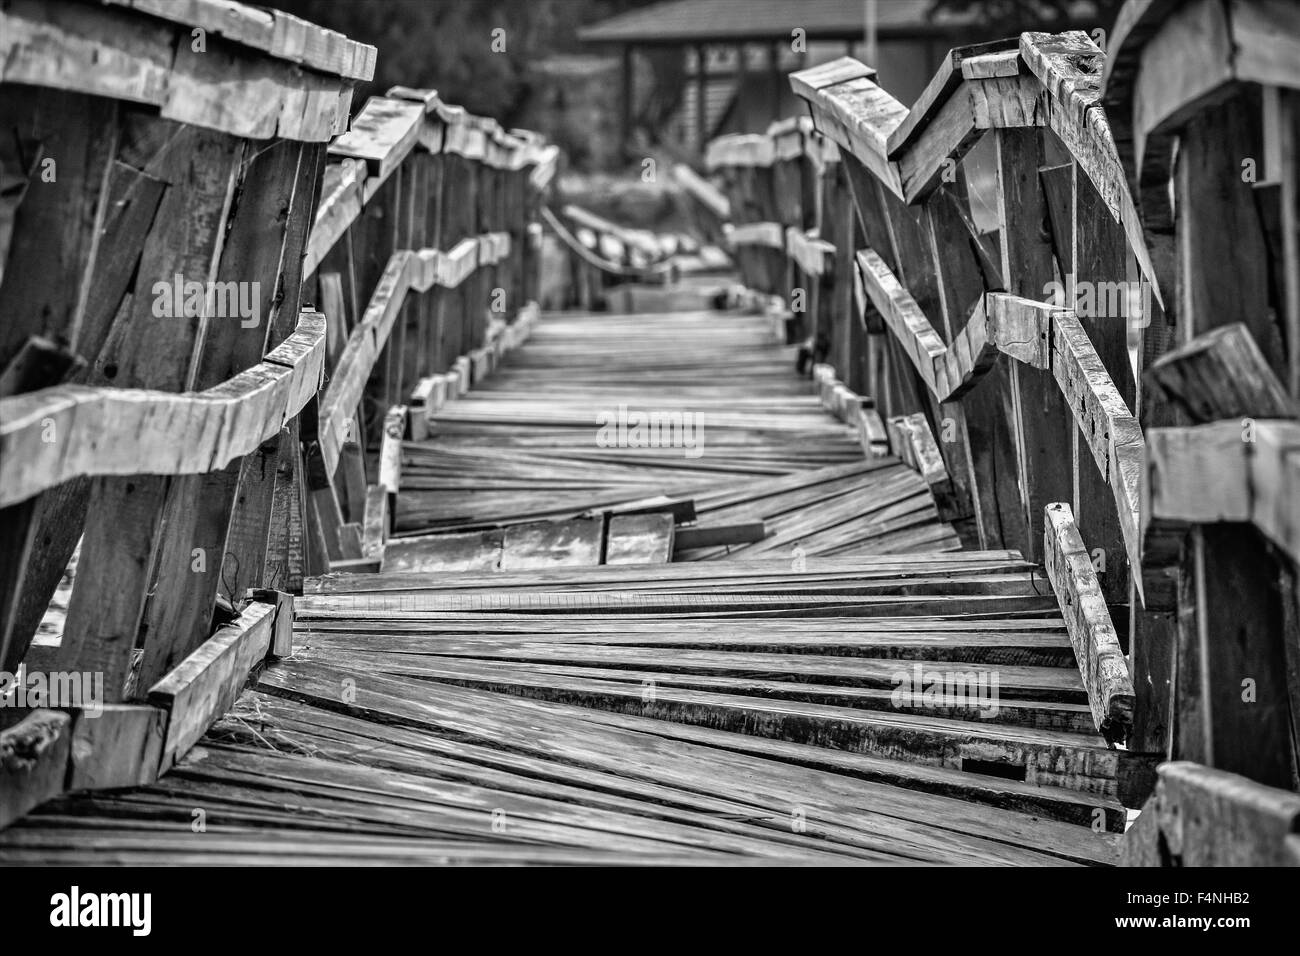 Closeup of a deformed and dilapidated wooden bridge in black and white Stock Photo